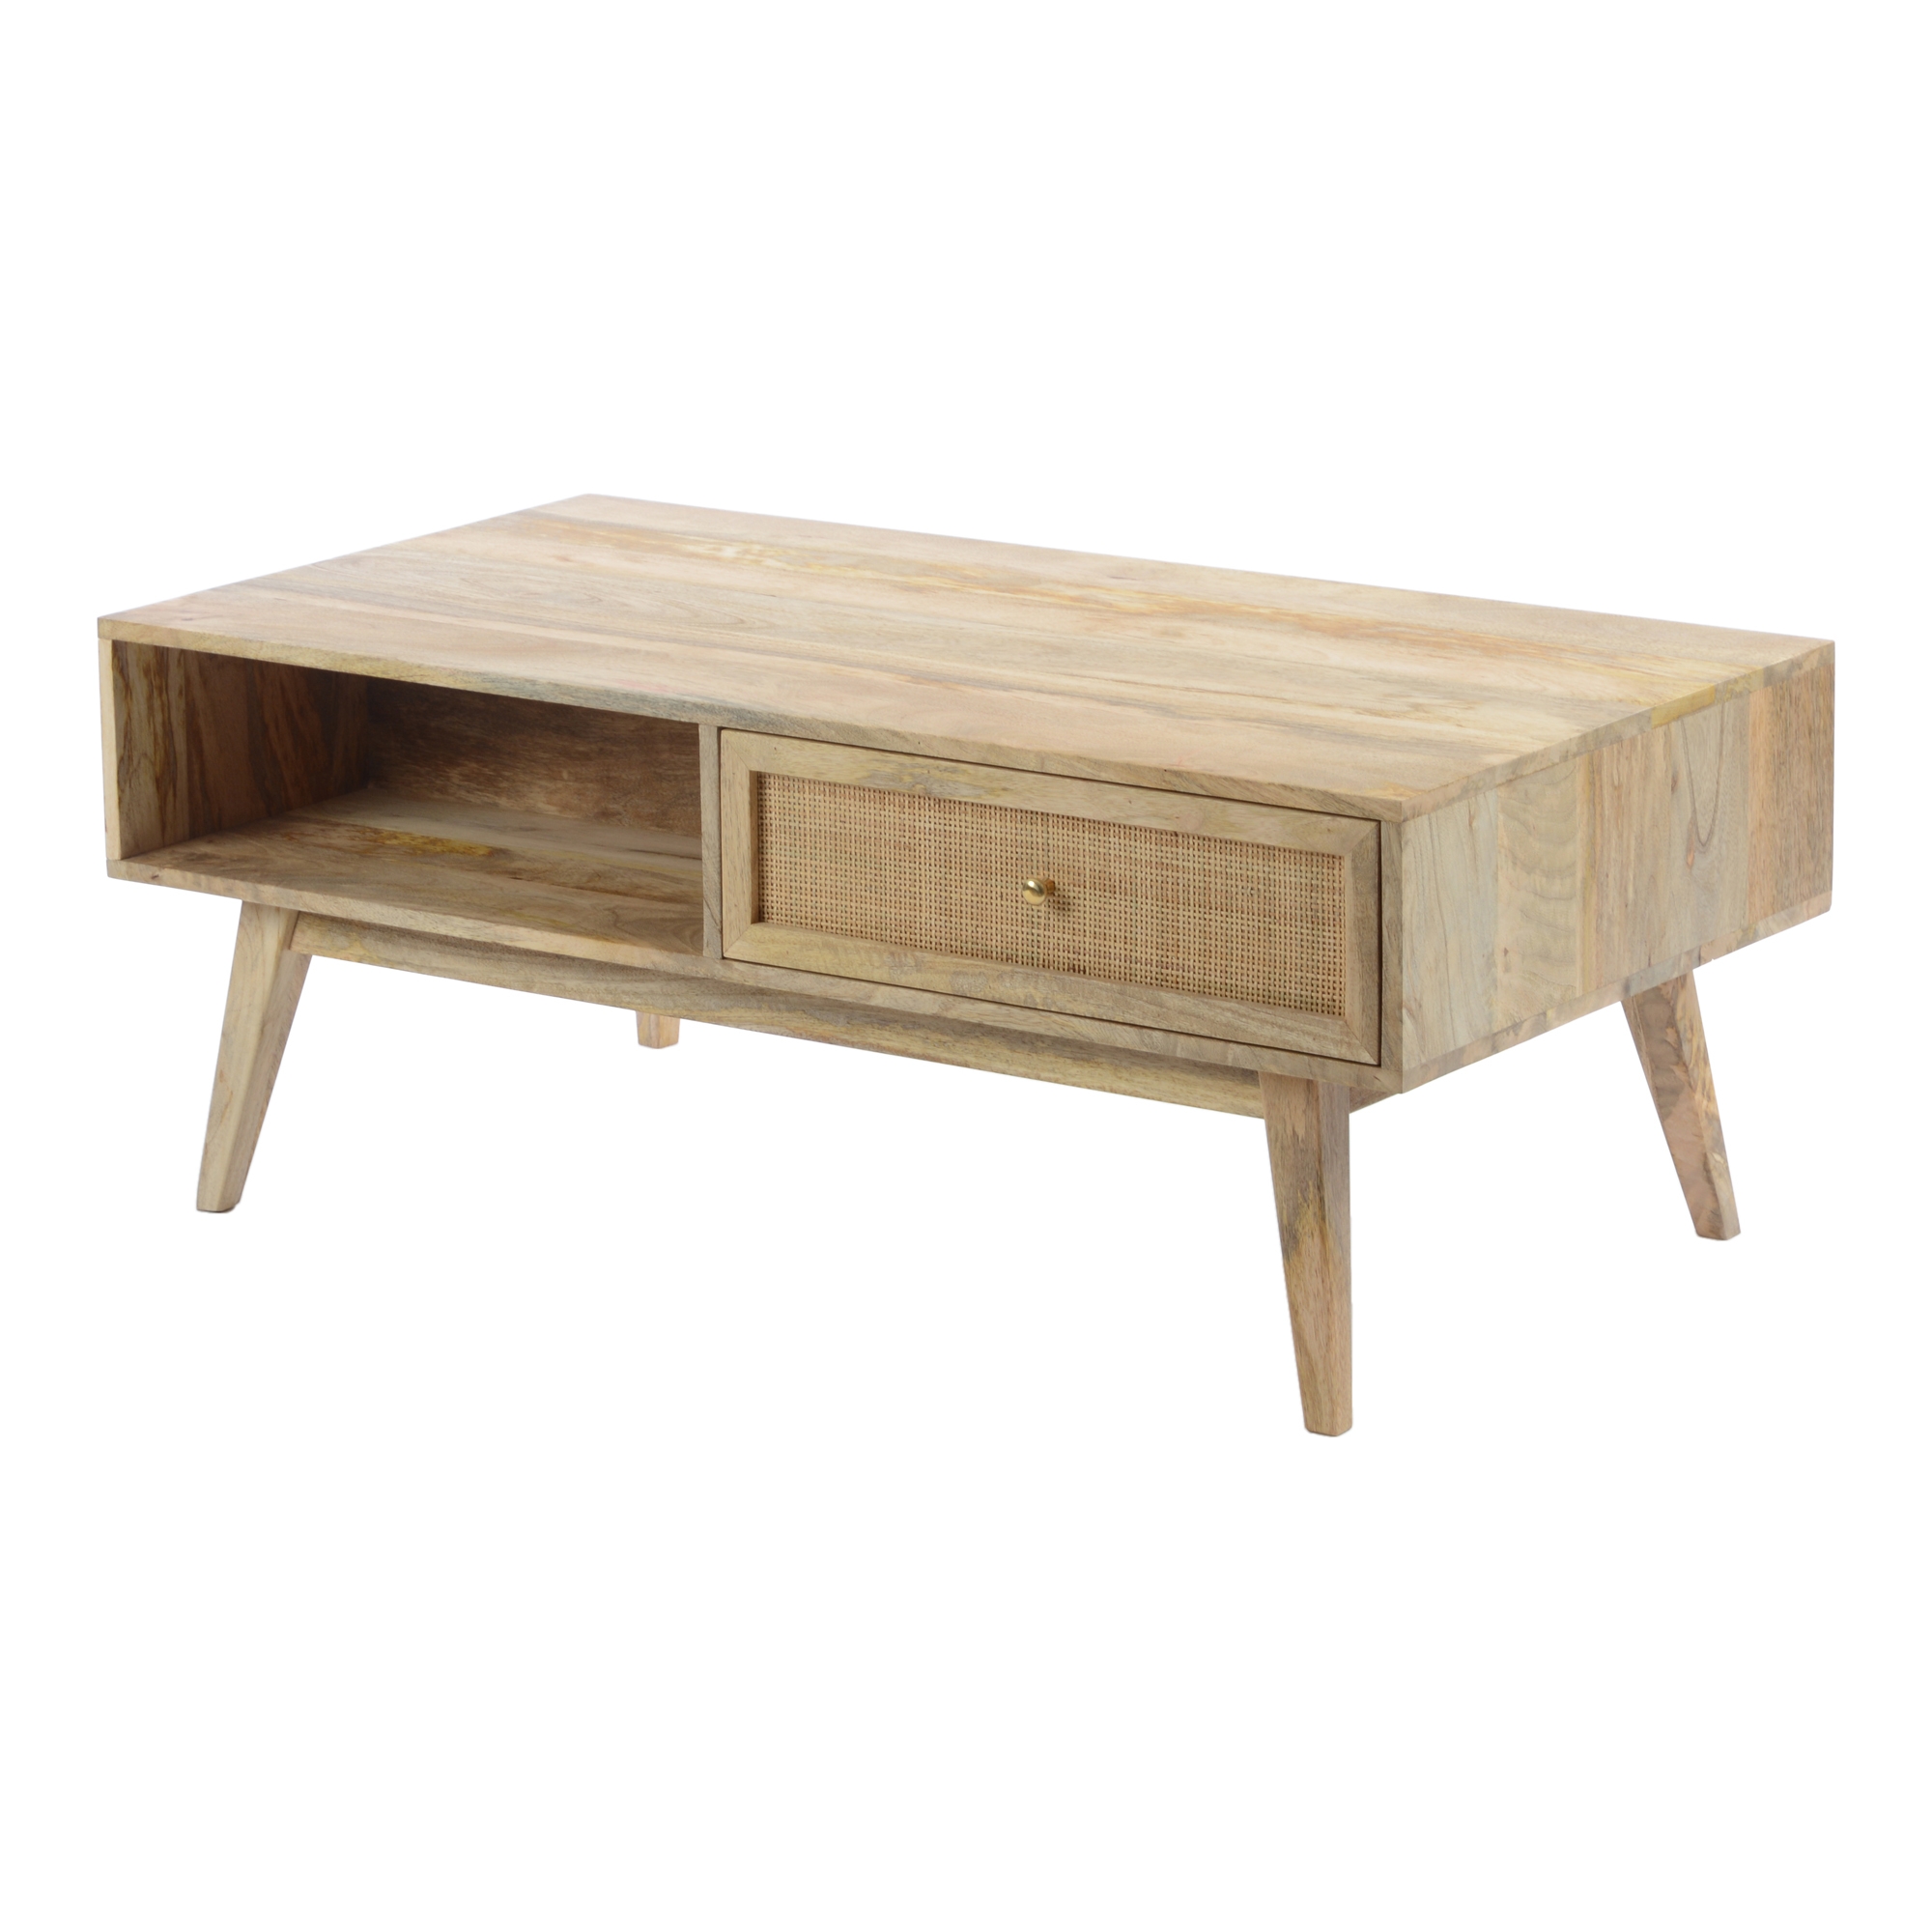 REED COFFEE TABLE - Image 1